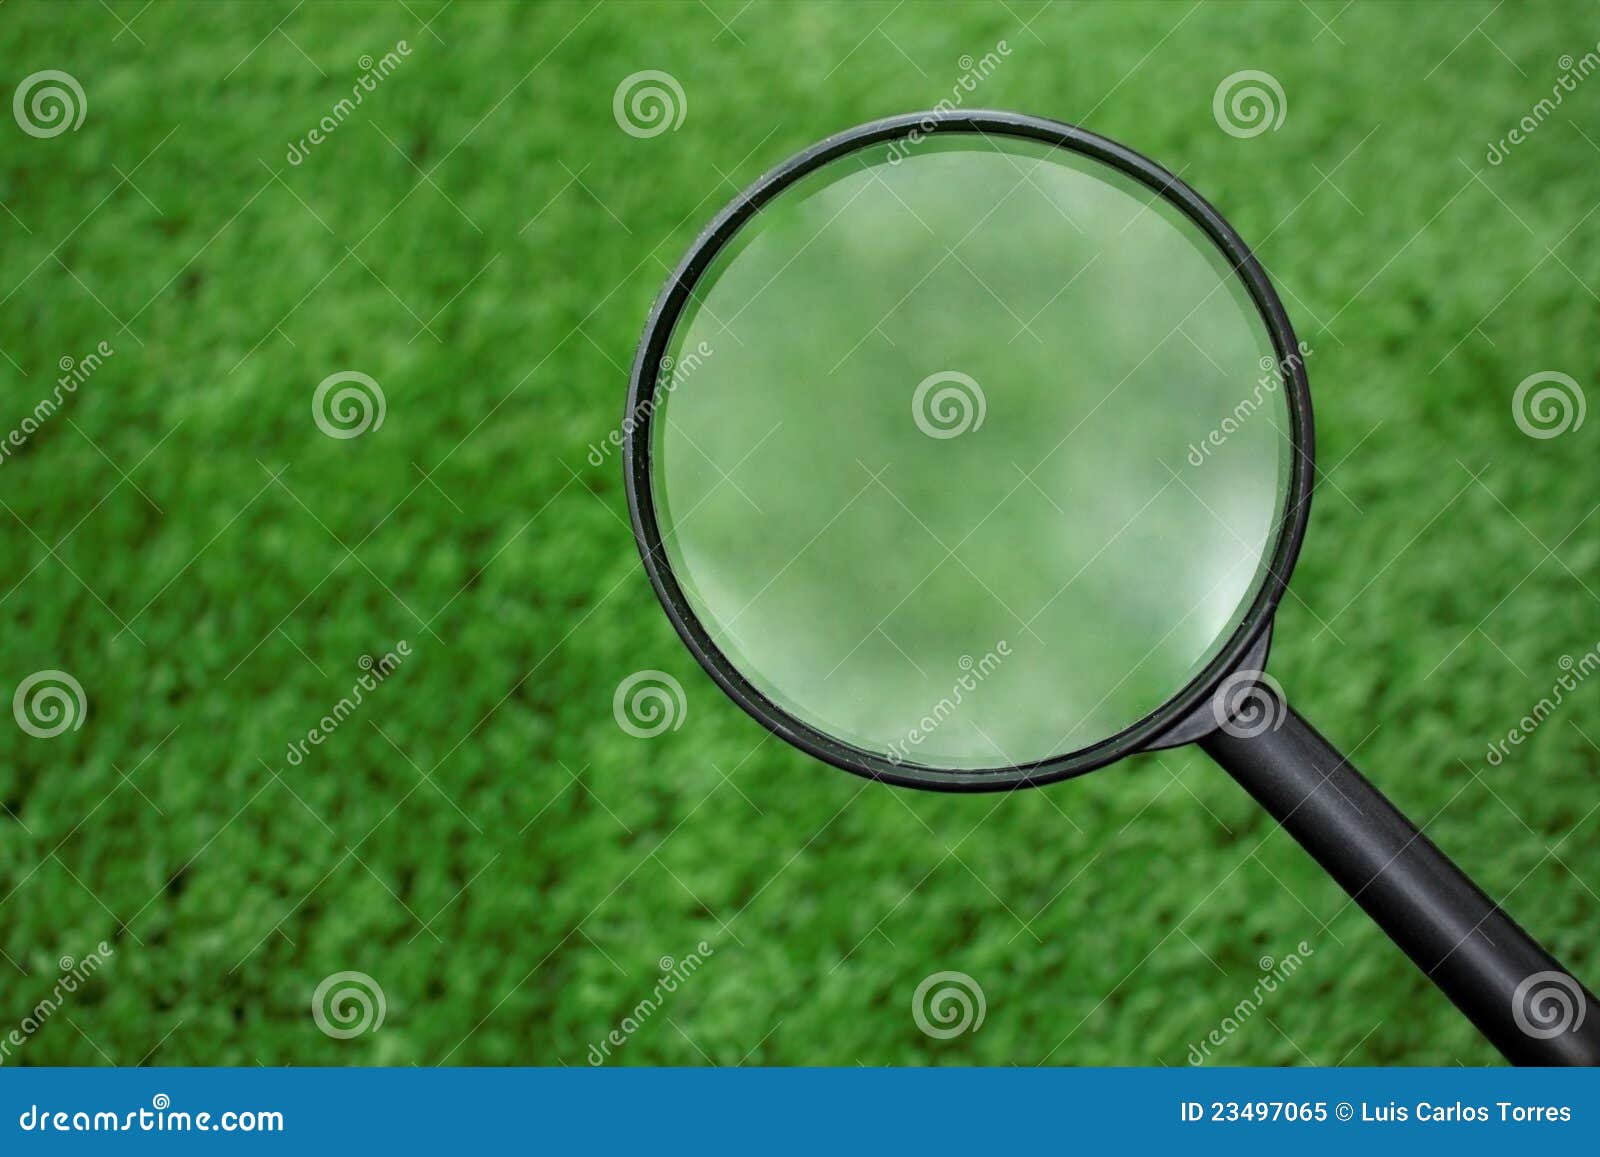 loupe searching on grass